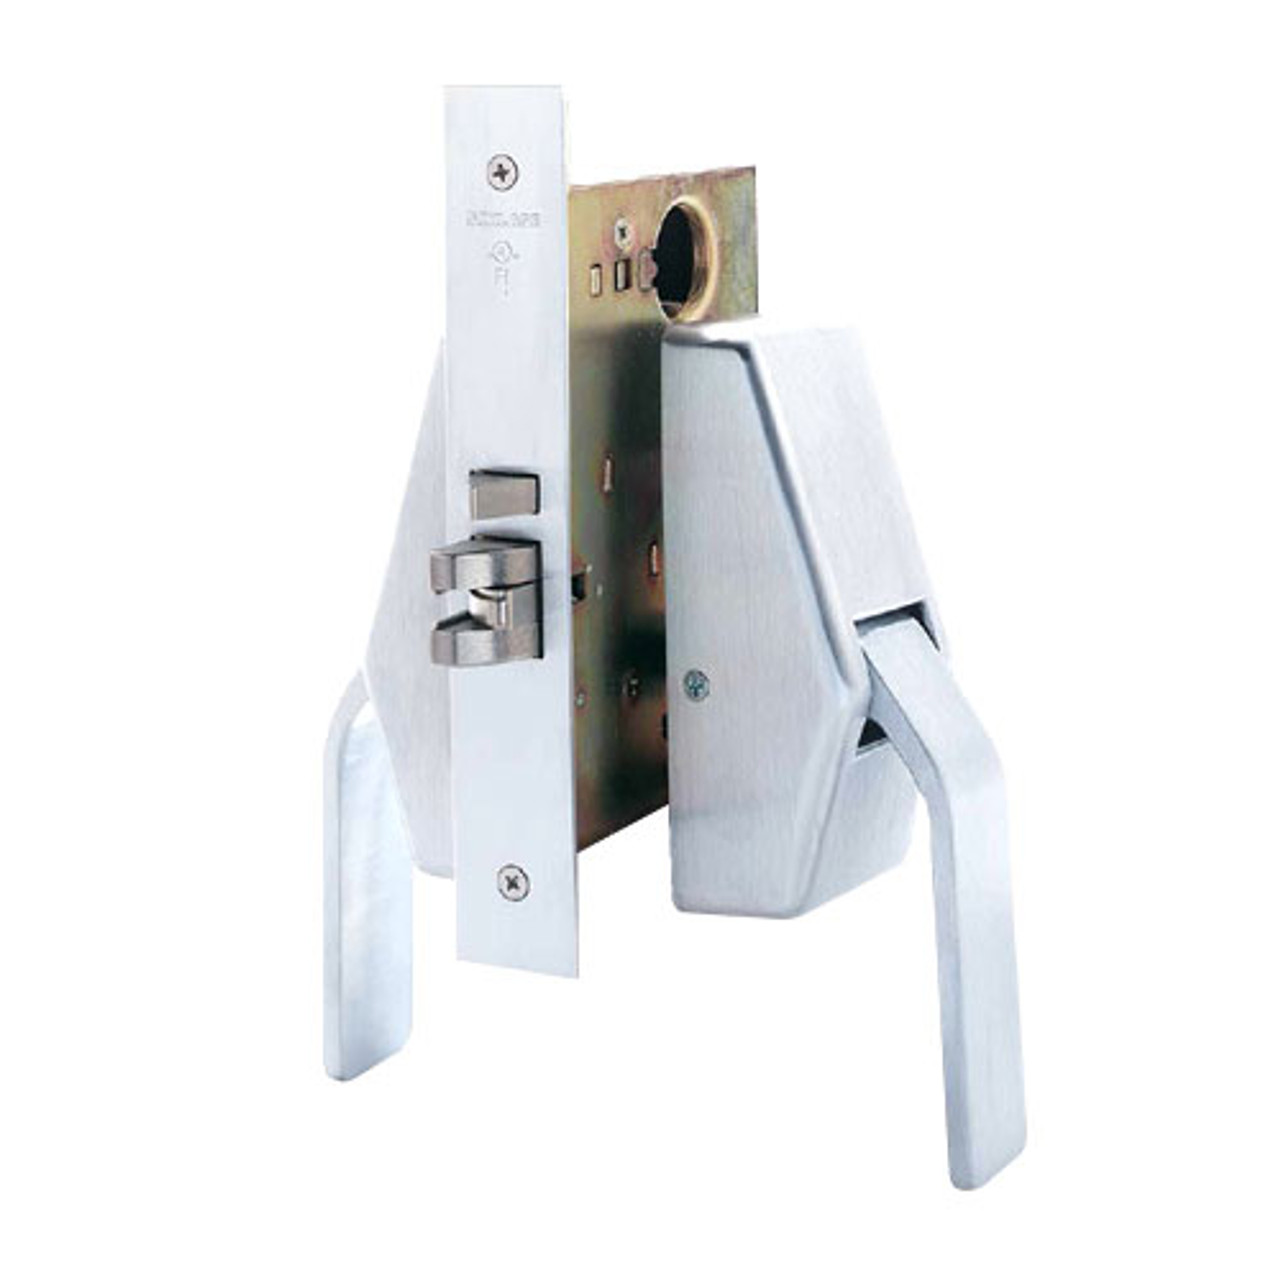 HL6-9453-625 Glynn Johnson HL6 Series Entrance Thumbturn Function Push and Pull latch with Mortise Lock in Bright Chrome Finish